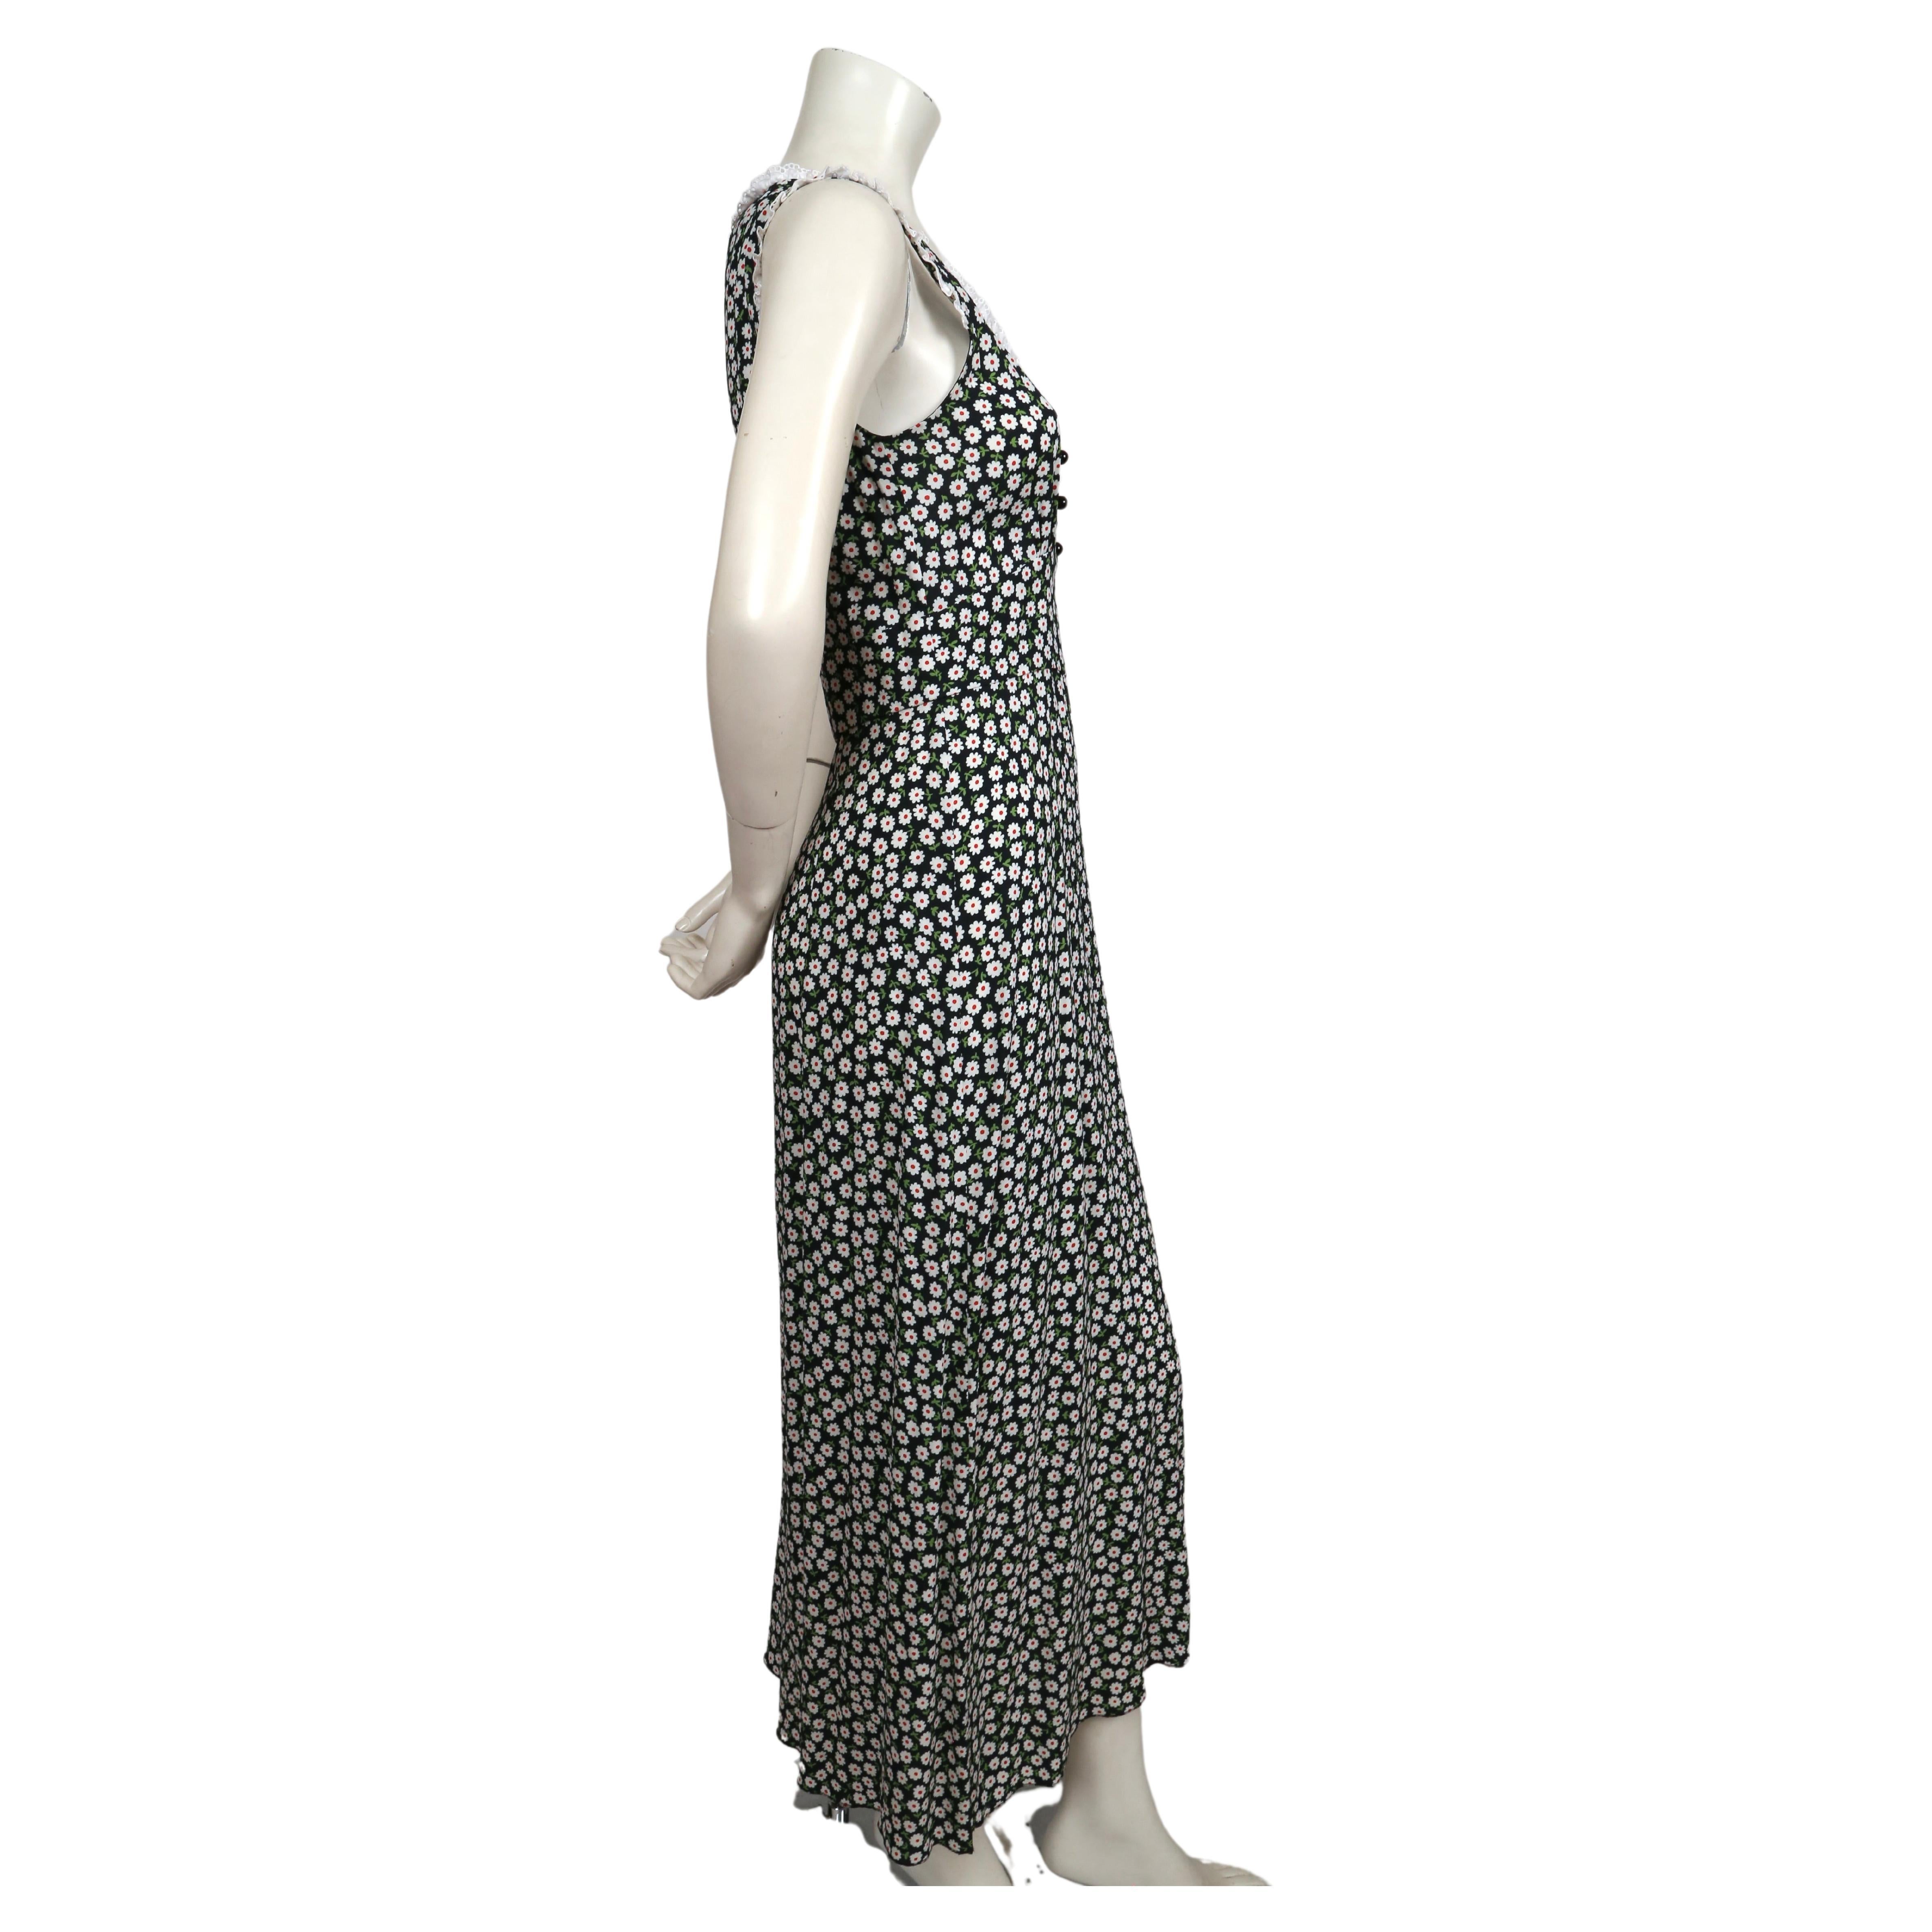 MIU MIU floral maxi dress with Broderie Anglaise lace trim For Sale 1